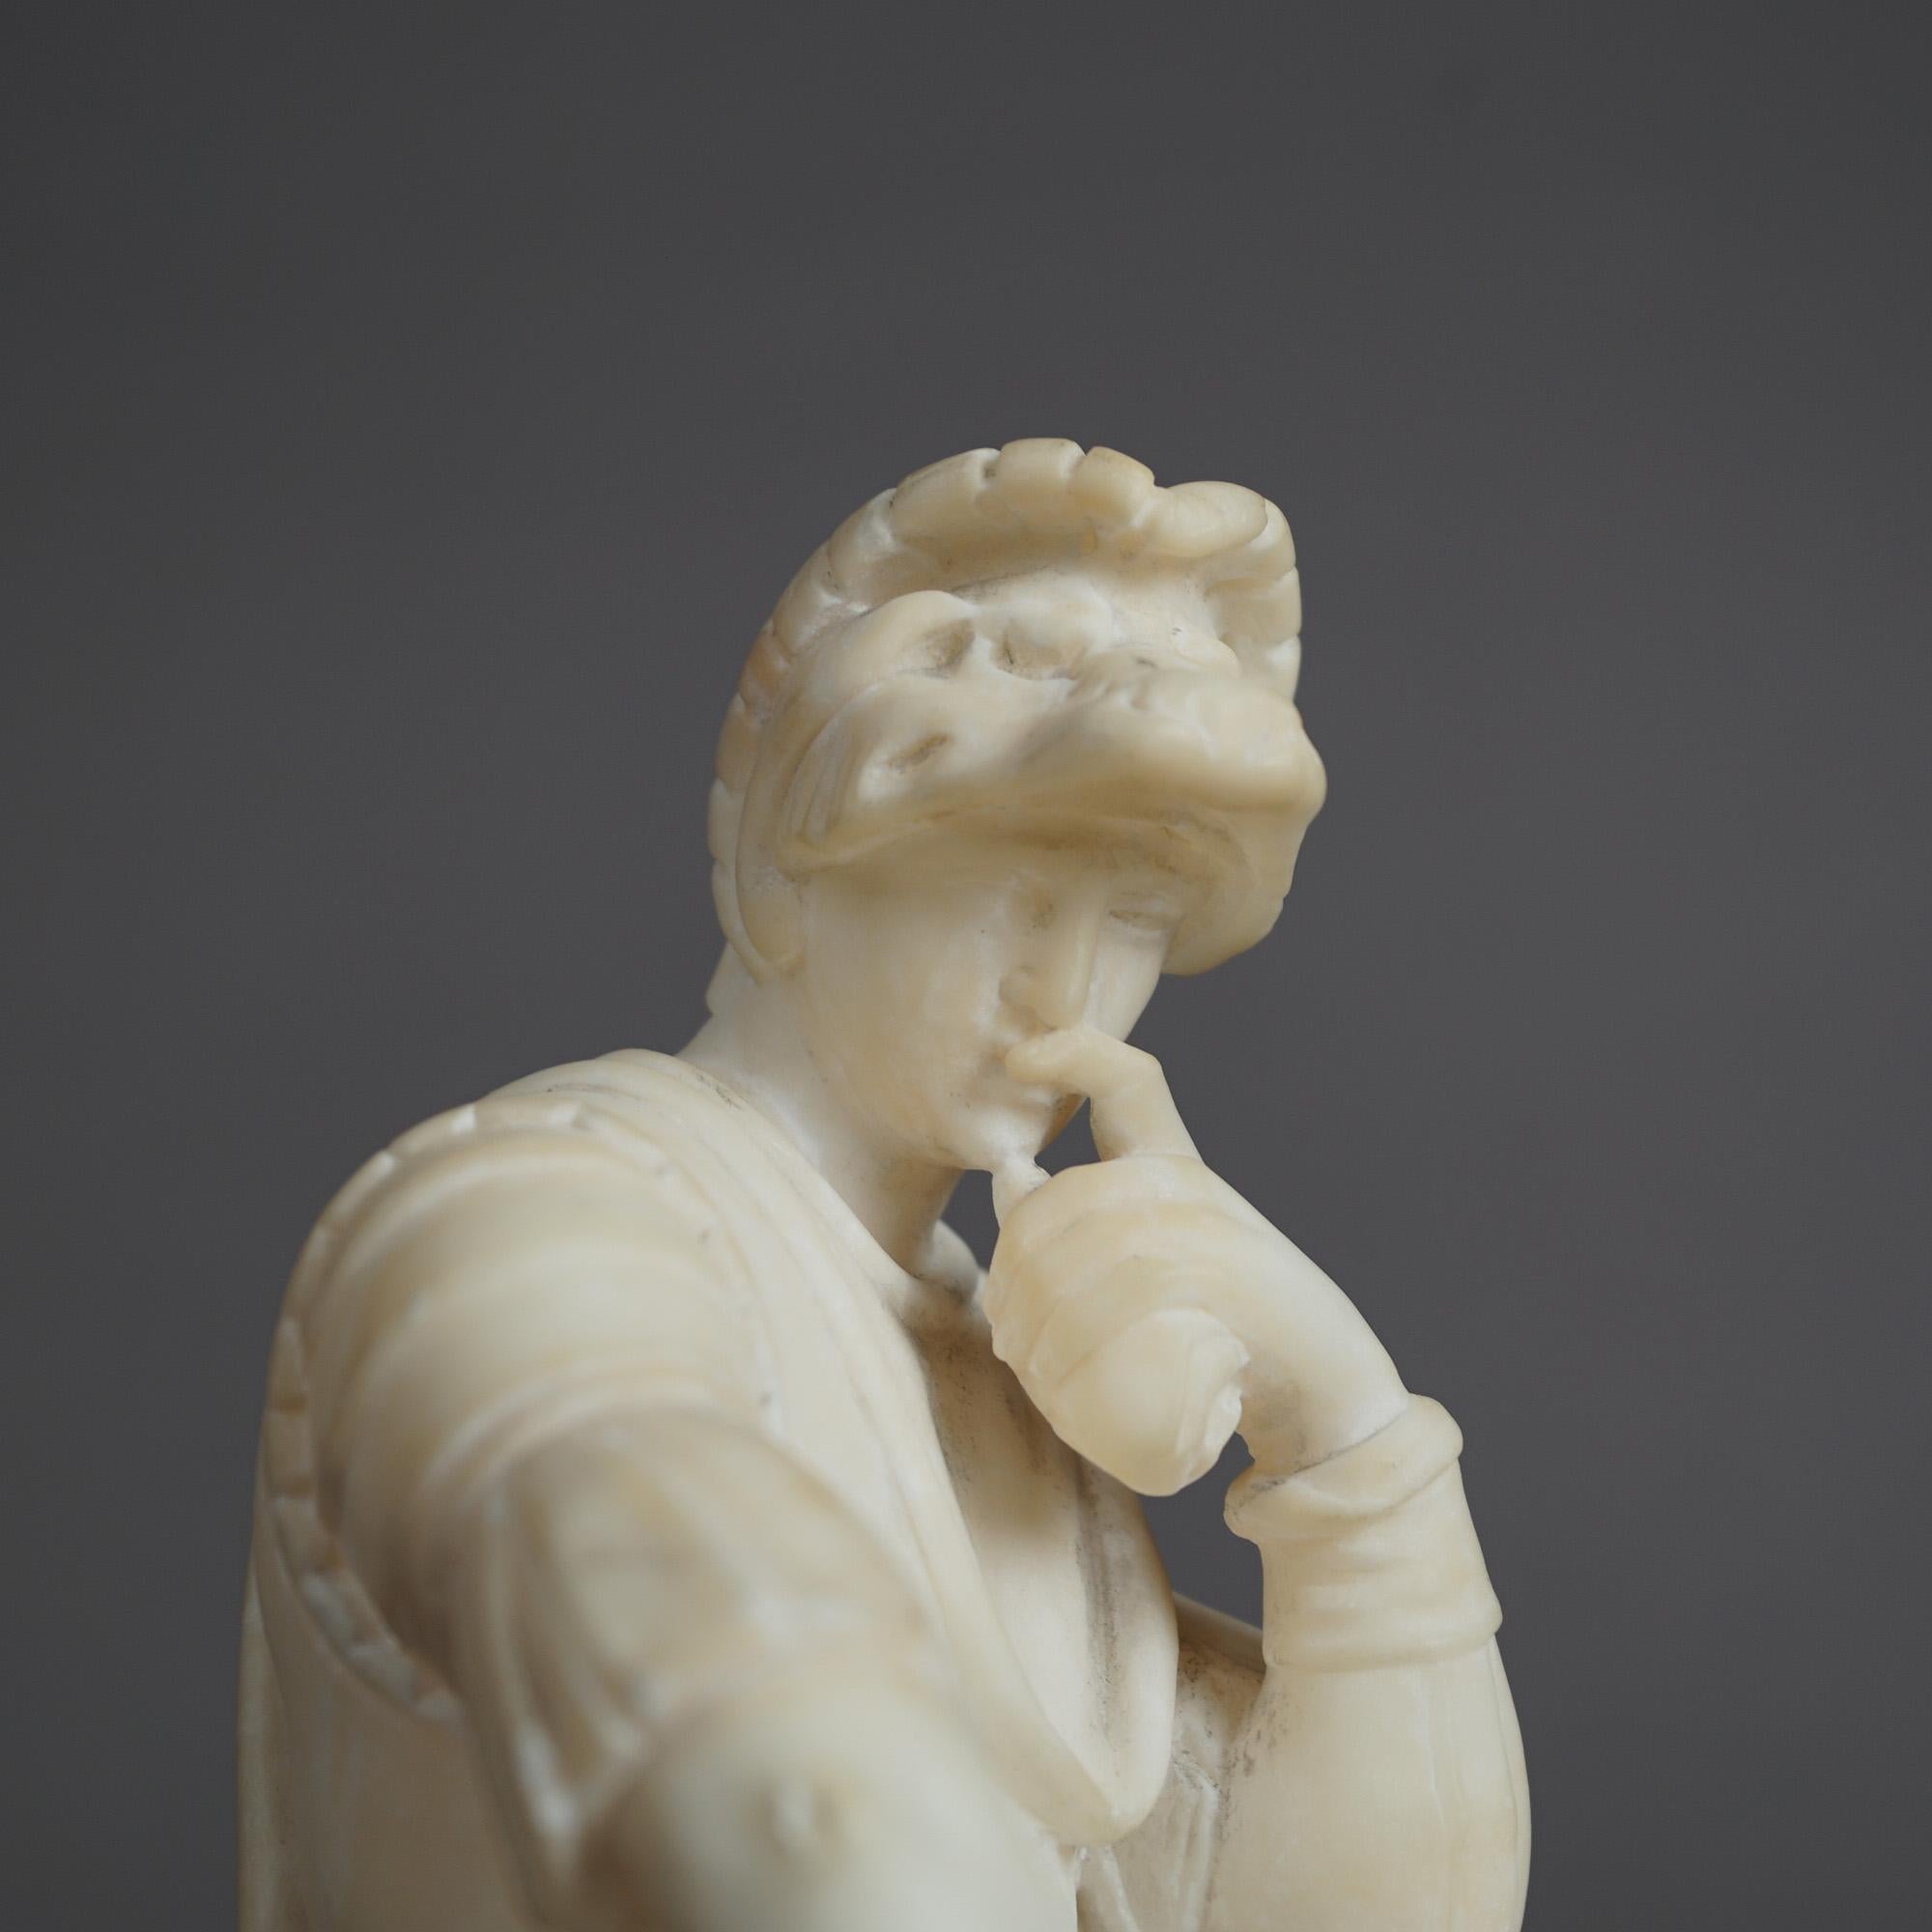 An antique figural sculpture offers carved alabaster figure after Michelangelo's statue of Lorenzo de Medici from the New Sacristy of San Lorenzo in Florence. , c1890

Measures- 11''H x 4.5''W x 4.5''D